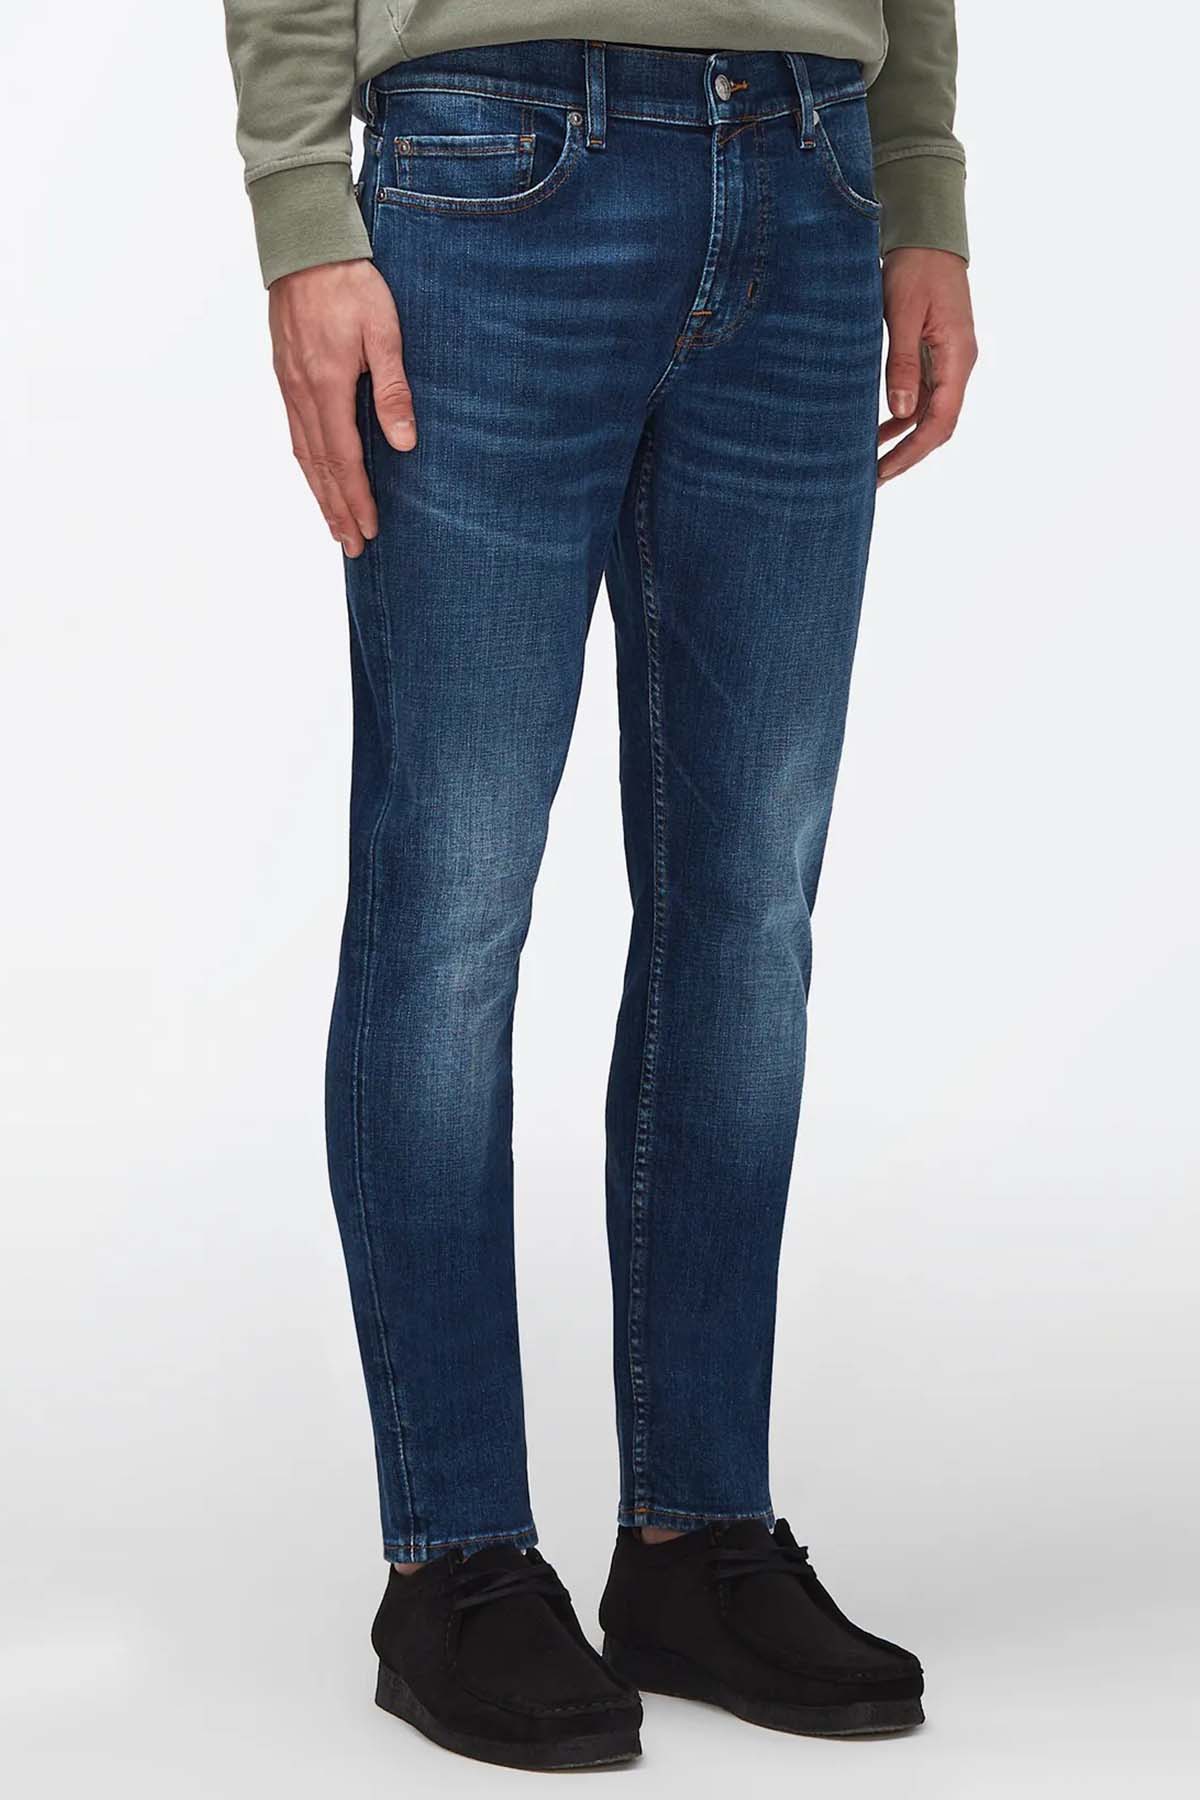 7 For All Mankind Paxtyn Skinny Fit Jeans-Libas Trendy Fashion Store